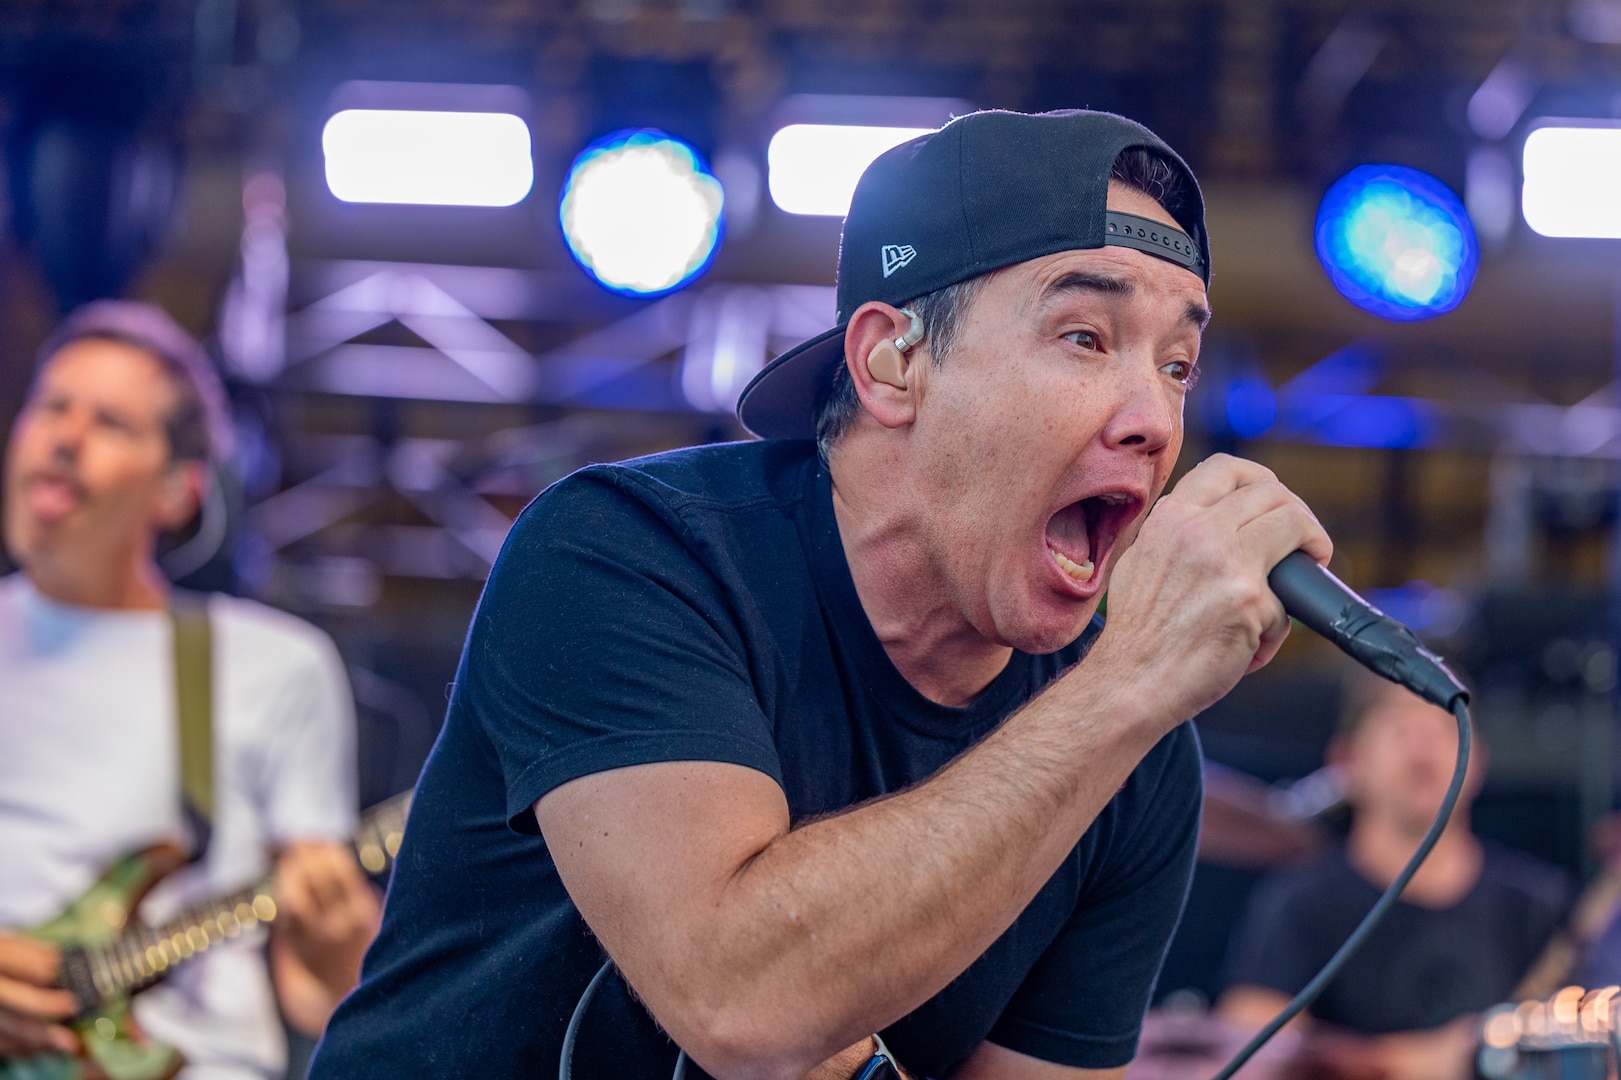 Doug Robb, lead vocalist for the rock band Hoobastank, performs at Rock Fest Aug. 20, 2022, at Malmstrom Air Force Base, Mont.